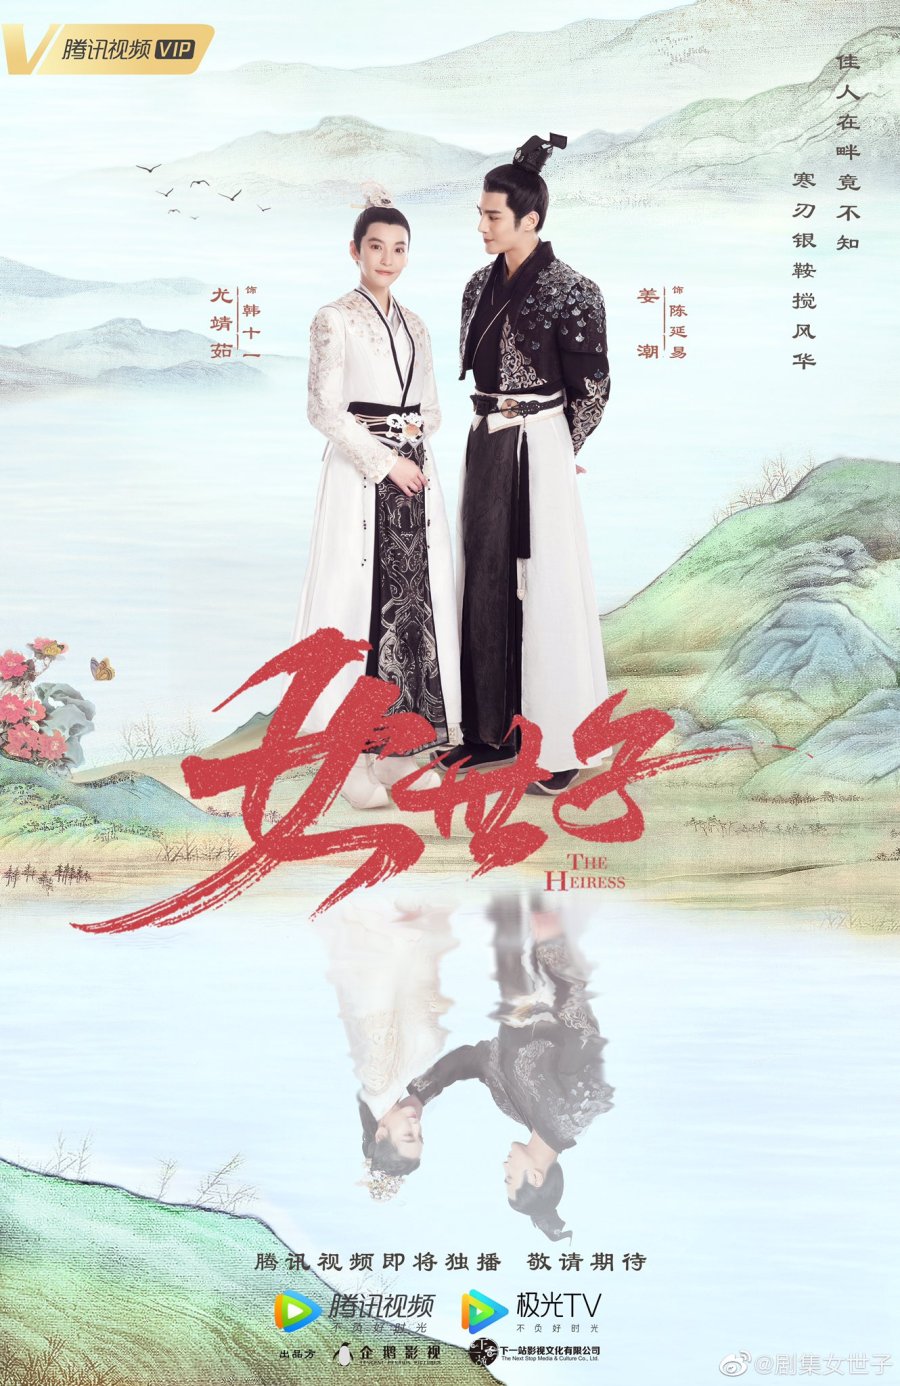 Poster Phim Nữ Thế Tử (The Heiress)